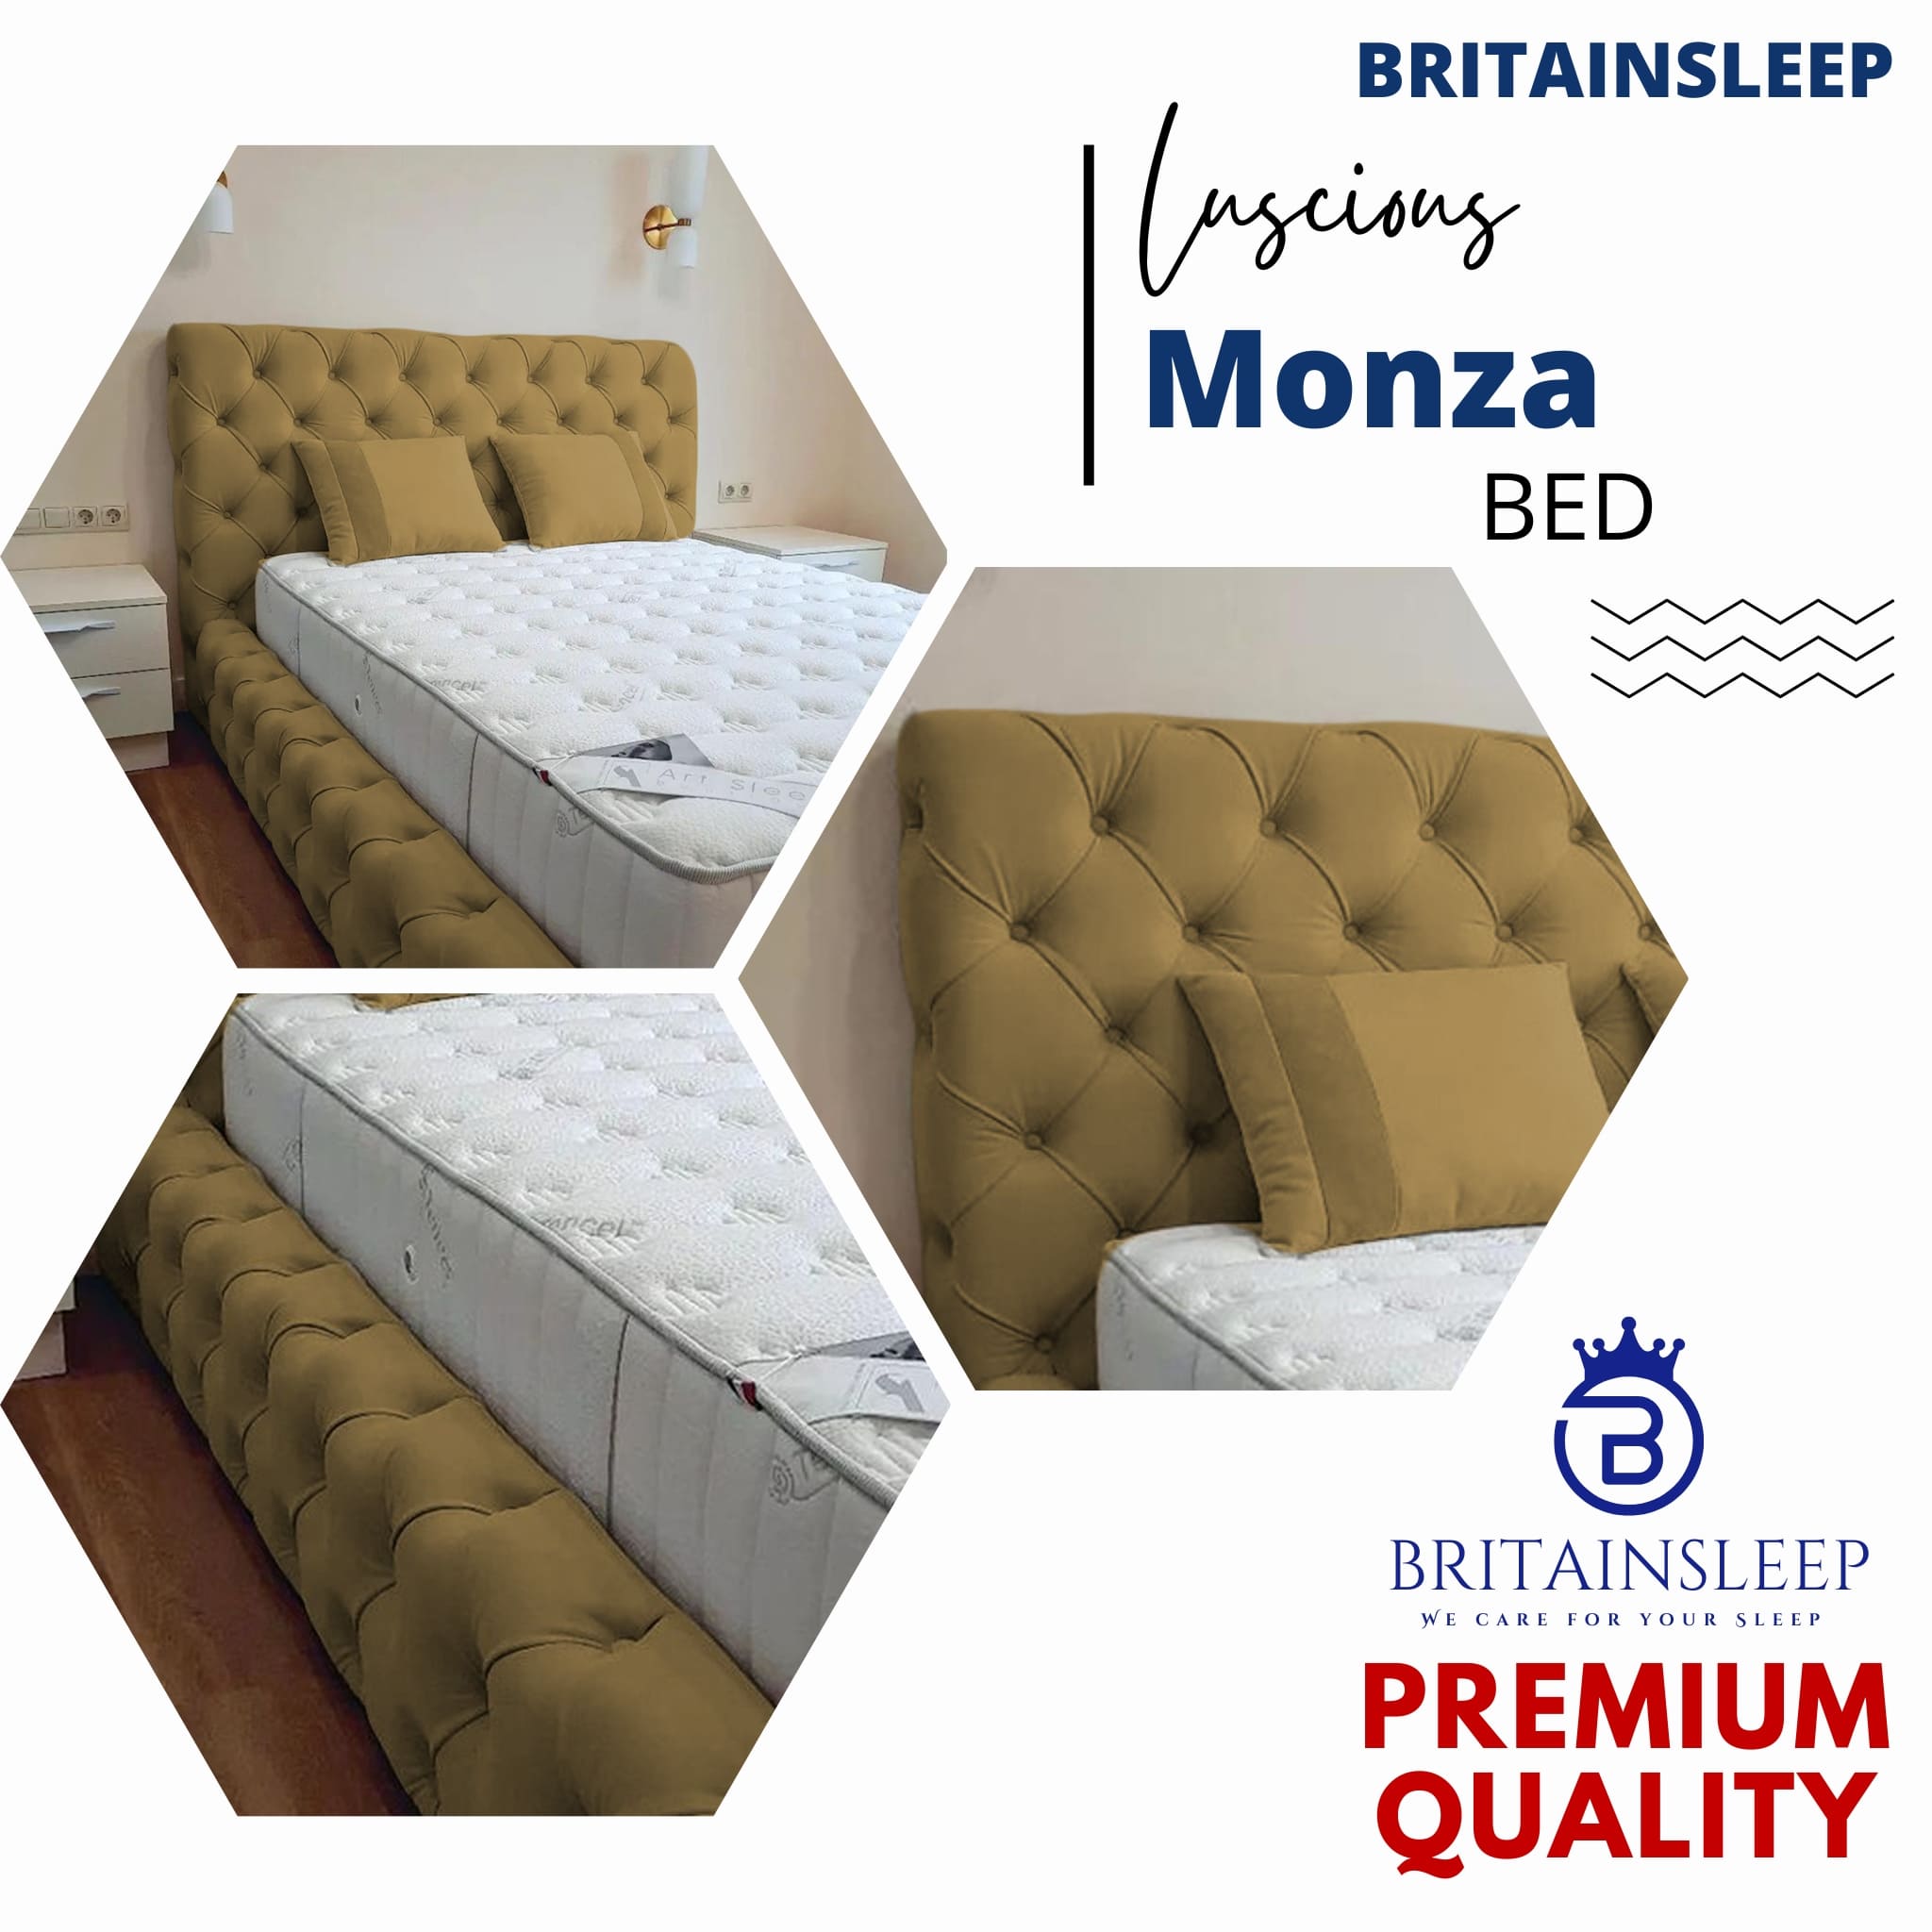 Luxury 50'' Monza Upholstered Ottoman Storage Bed Frame | Double | Single | Small Double | KingSize | Super King Size Bed Britainsleep